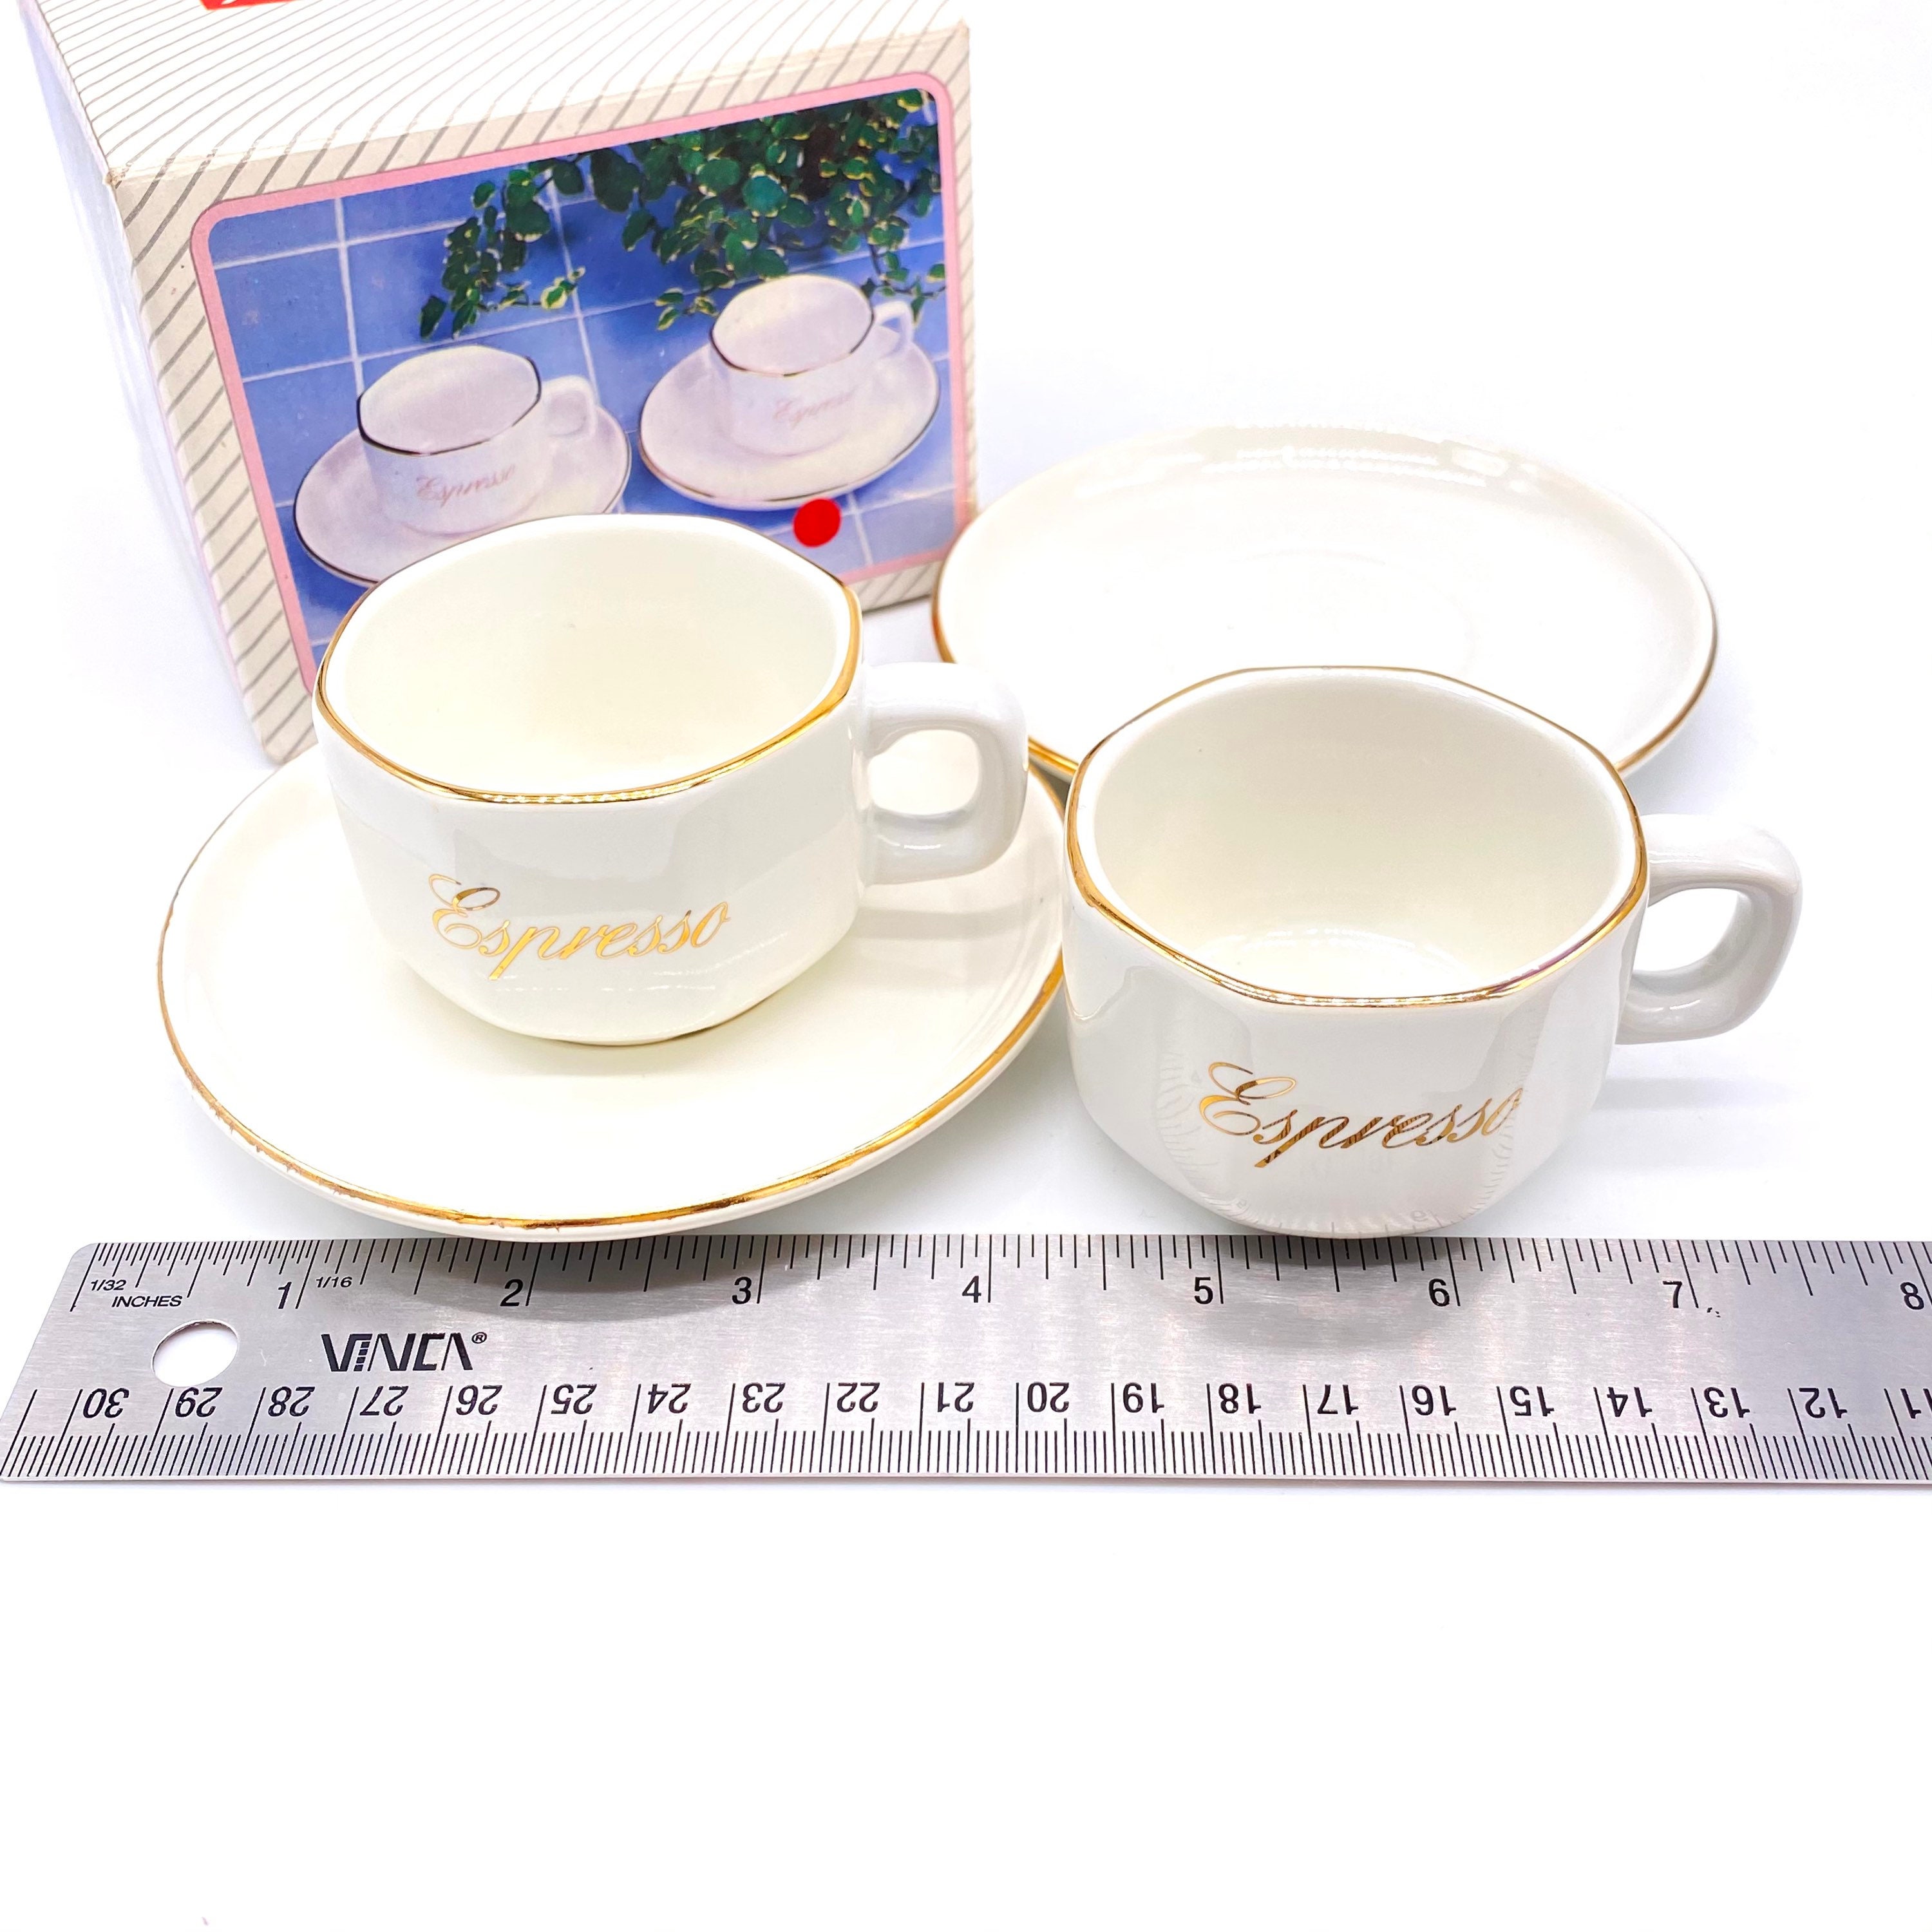 Color Dreams Demitasse Cup & Saucerグラス/カップ - グラス/カップ